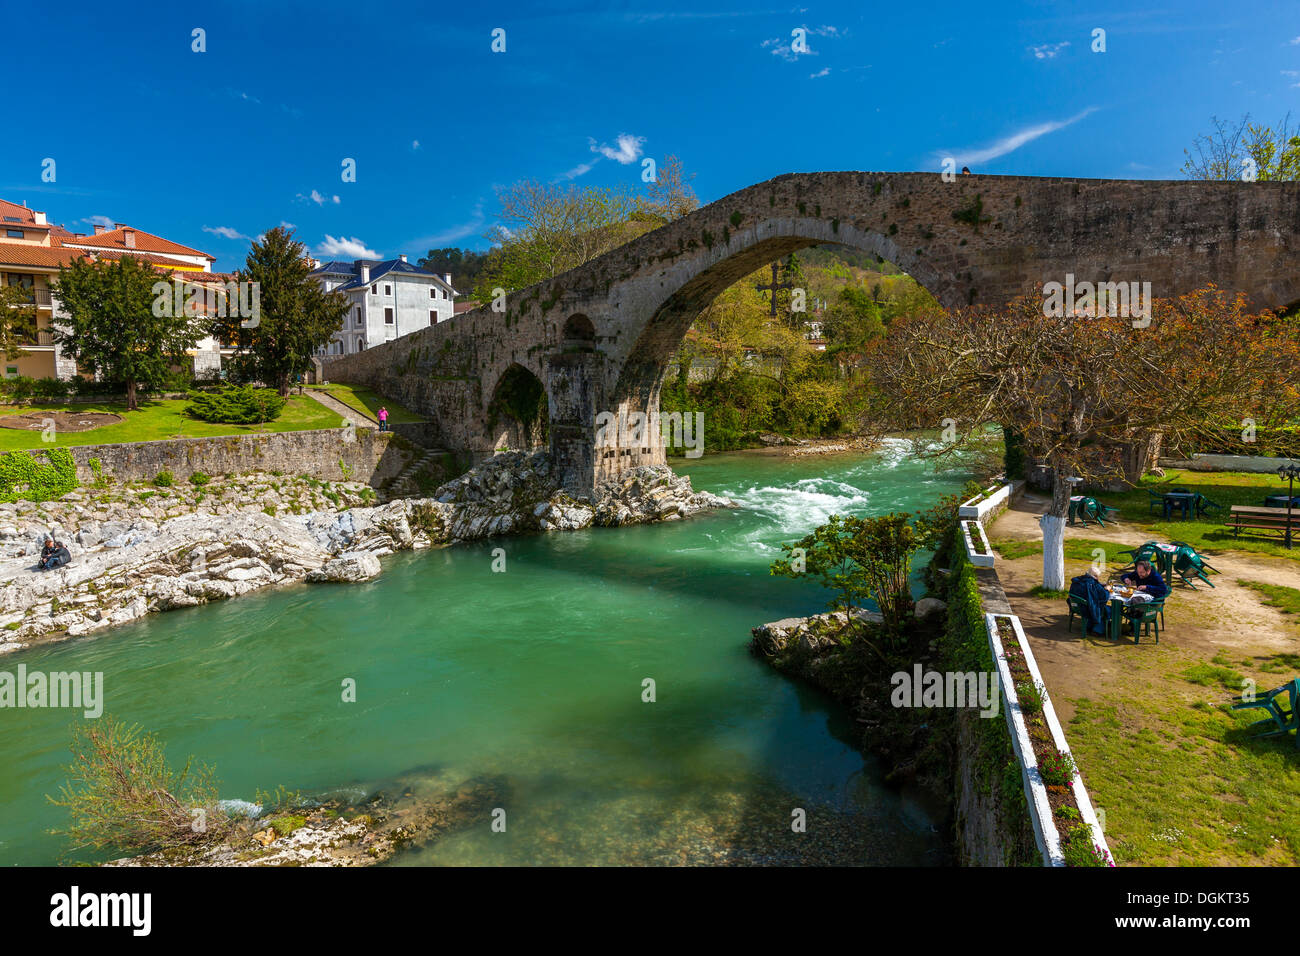 A view through the archway of a Roman bridge over the Sella River in Cangas De Onis. Stock Photo